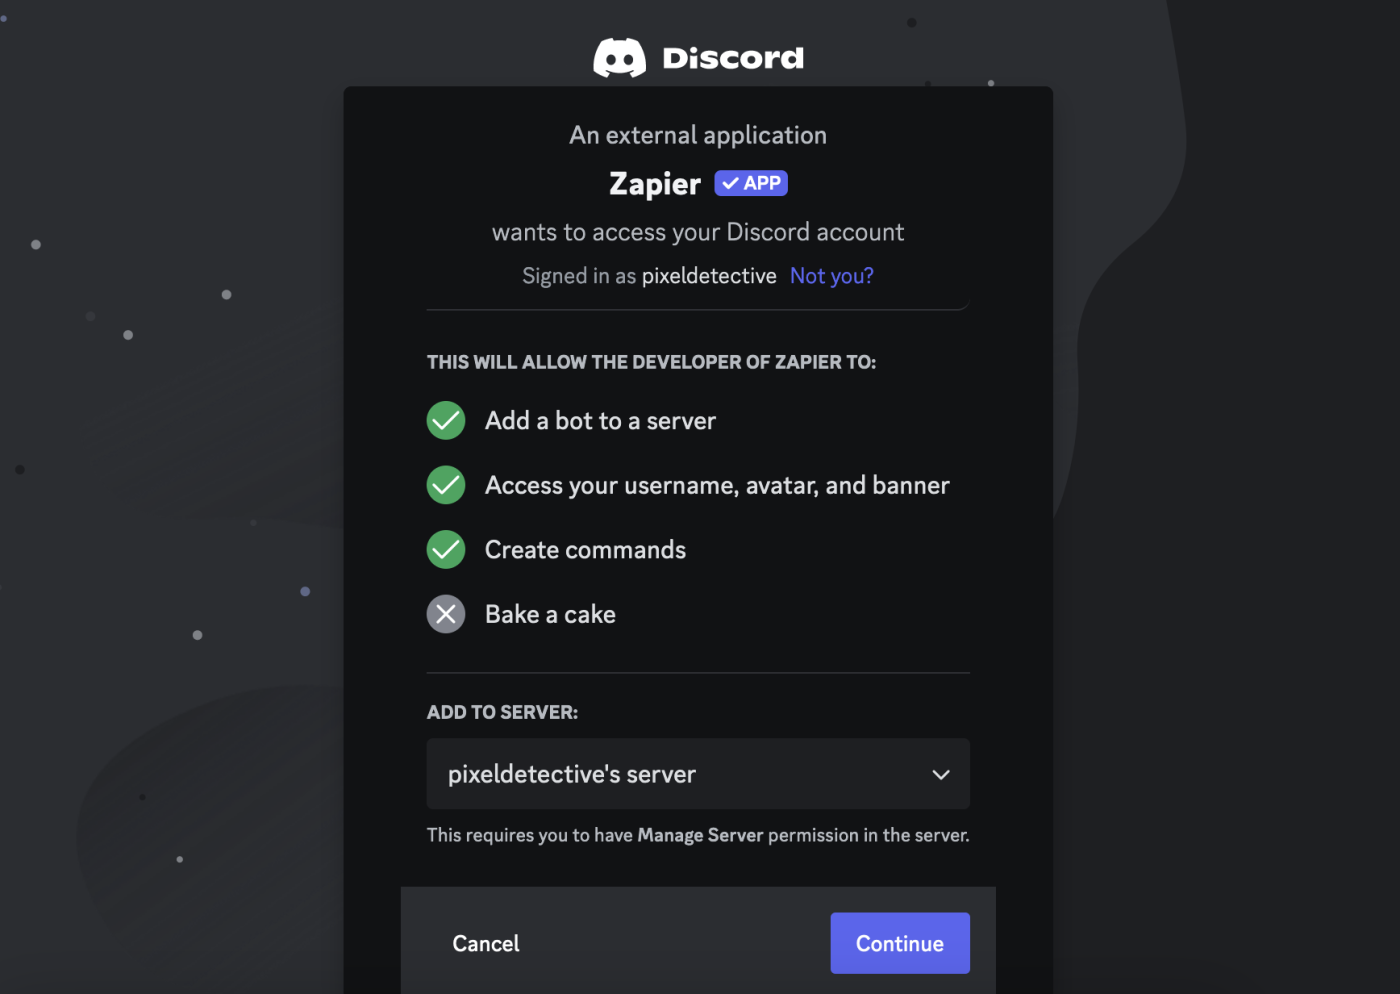 A permissions pop-up asking for permission to access a Discord account.